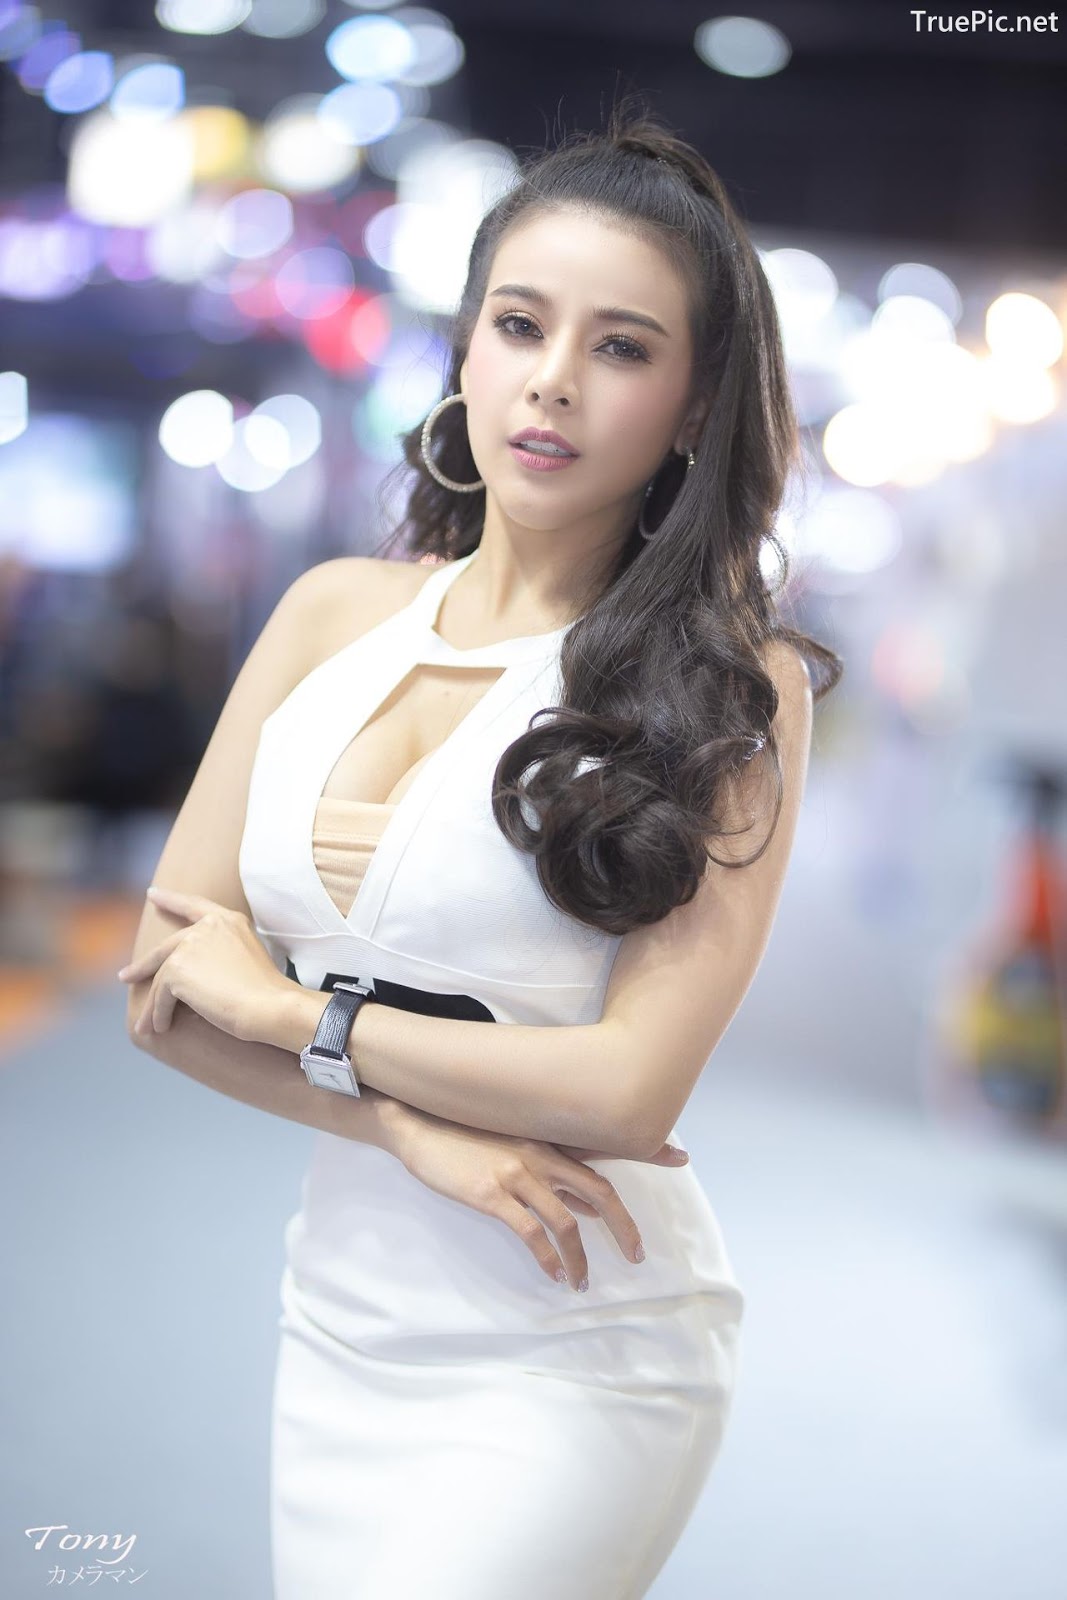 Image-Thailand-Hot-Model-Thai-Racing-Girl-At-Motor-Expo-2018-TruePic.net- Picture-36